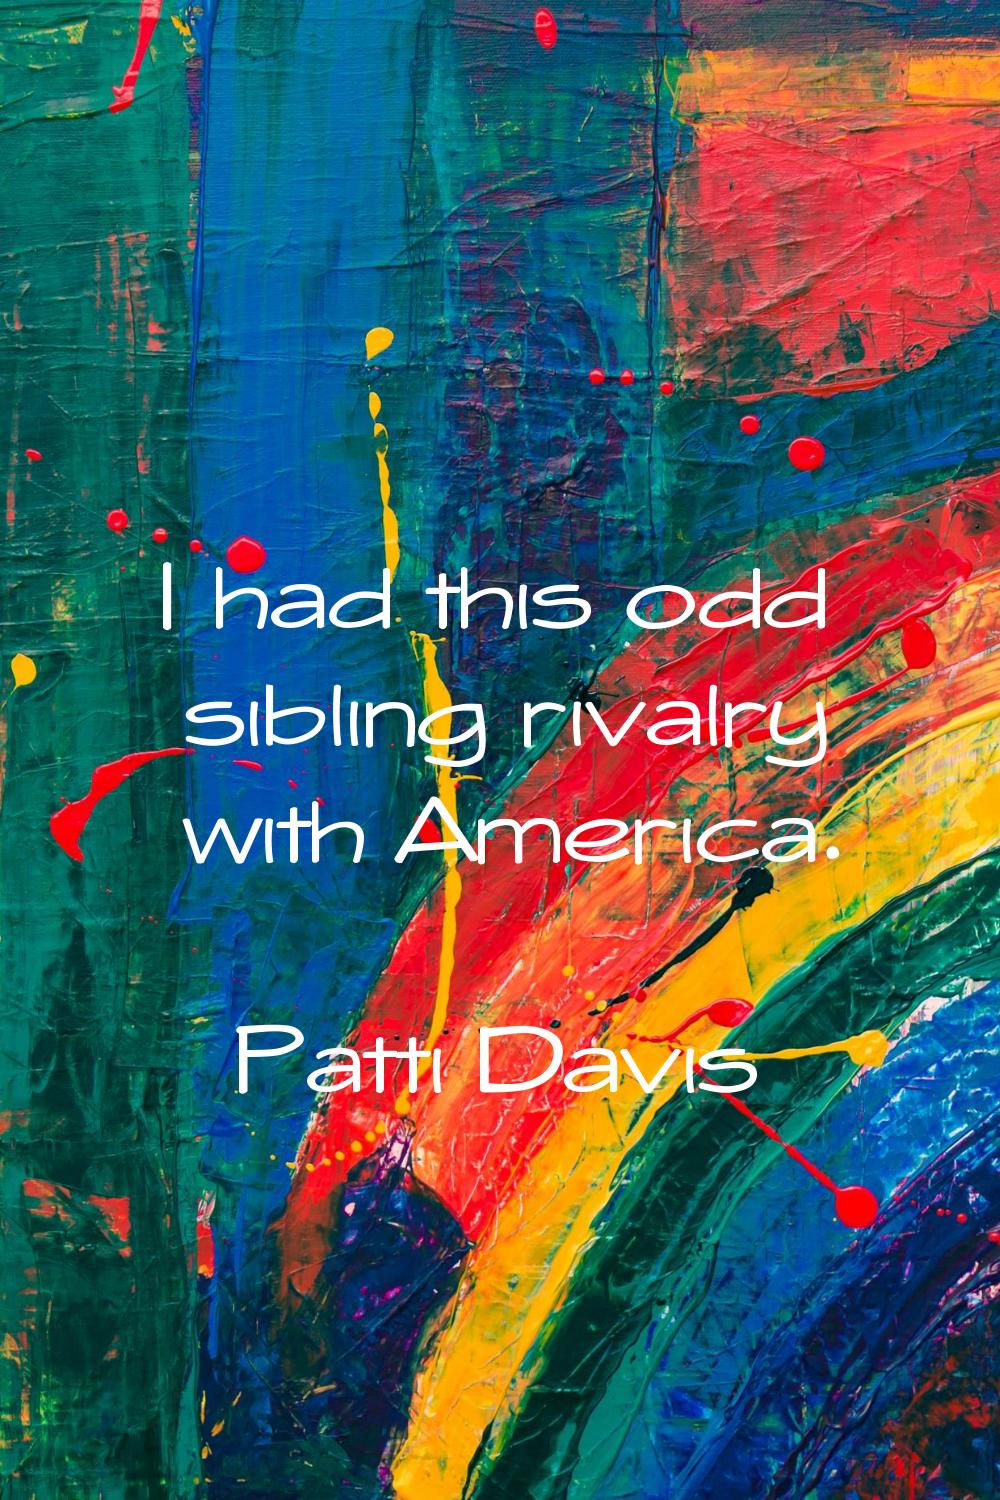 I had this odd sibling rivalry with America.